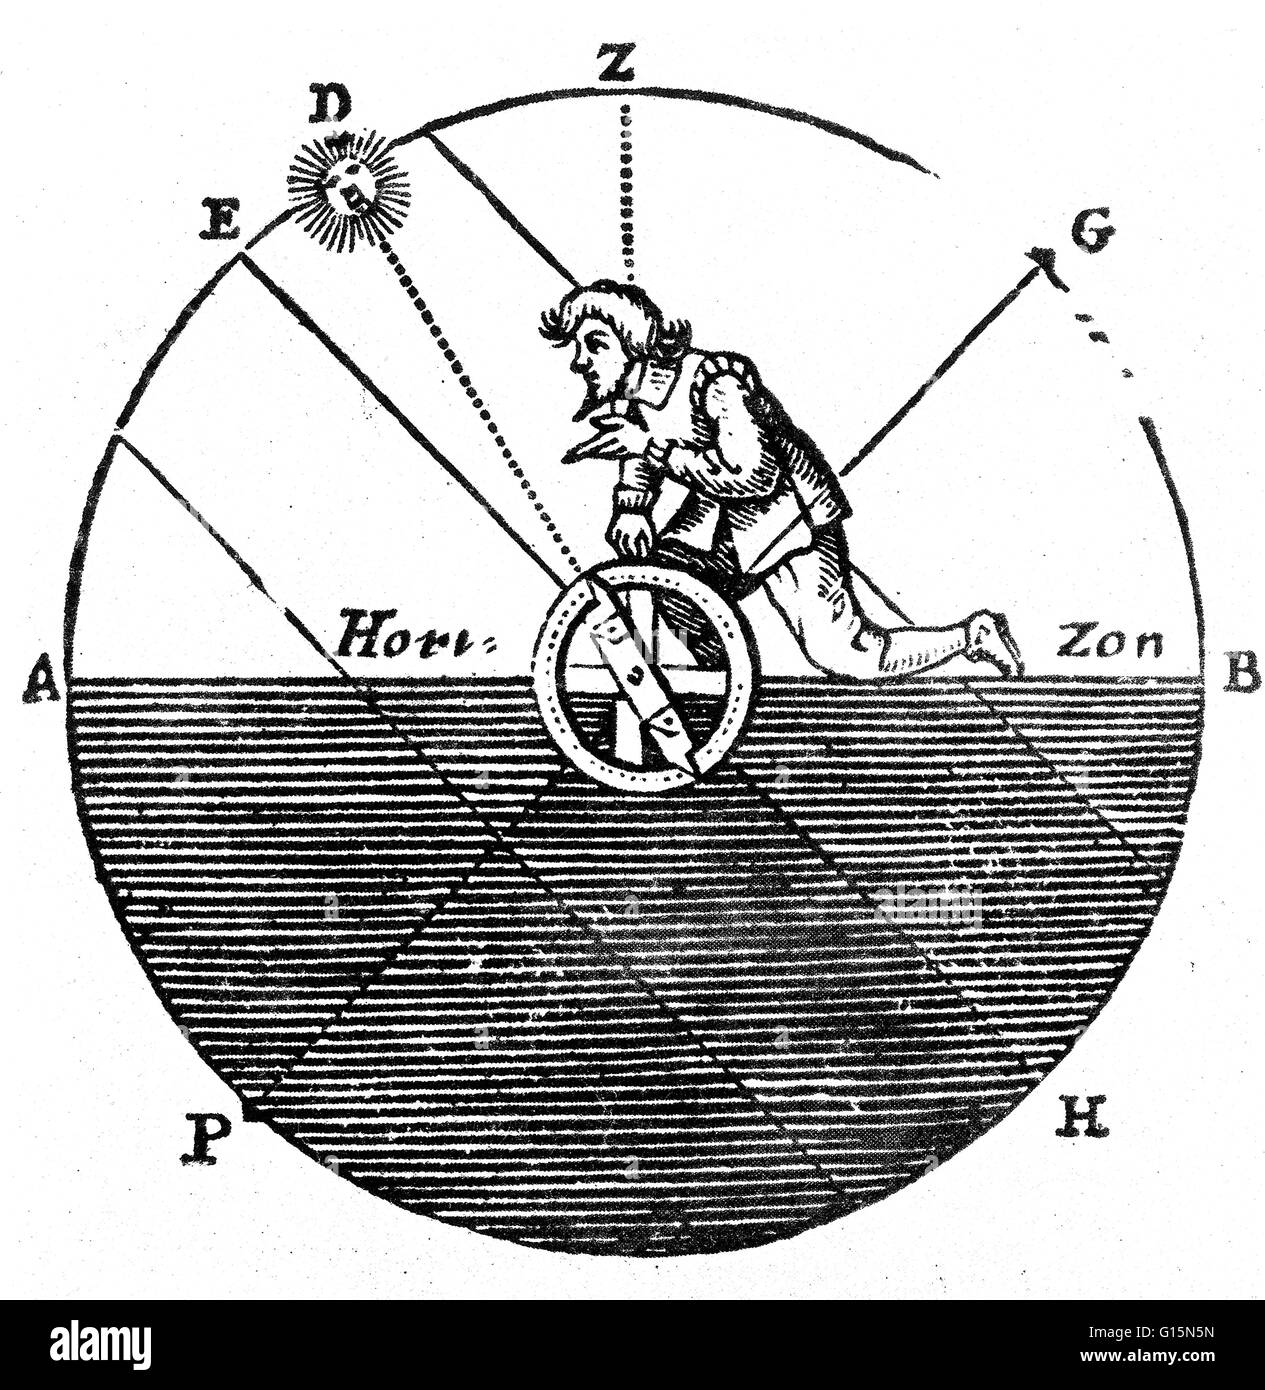 17th century woodcut gives a crude illustration of how the astrolabe was used to measure the sun's zenith distance. The zenith distance is the angle between the indefinite point Z and the sun D. An astrolabe is an elaborate inclinometer, historically used Stock Photo